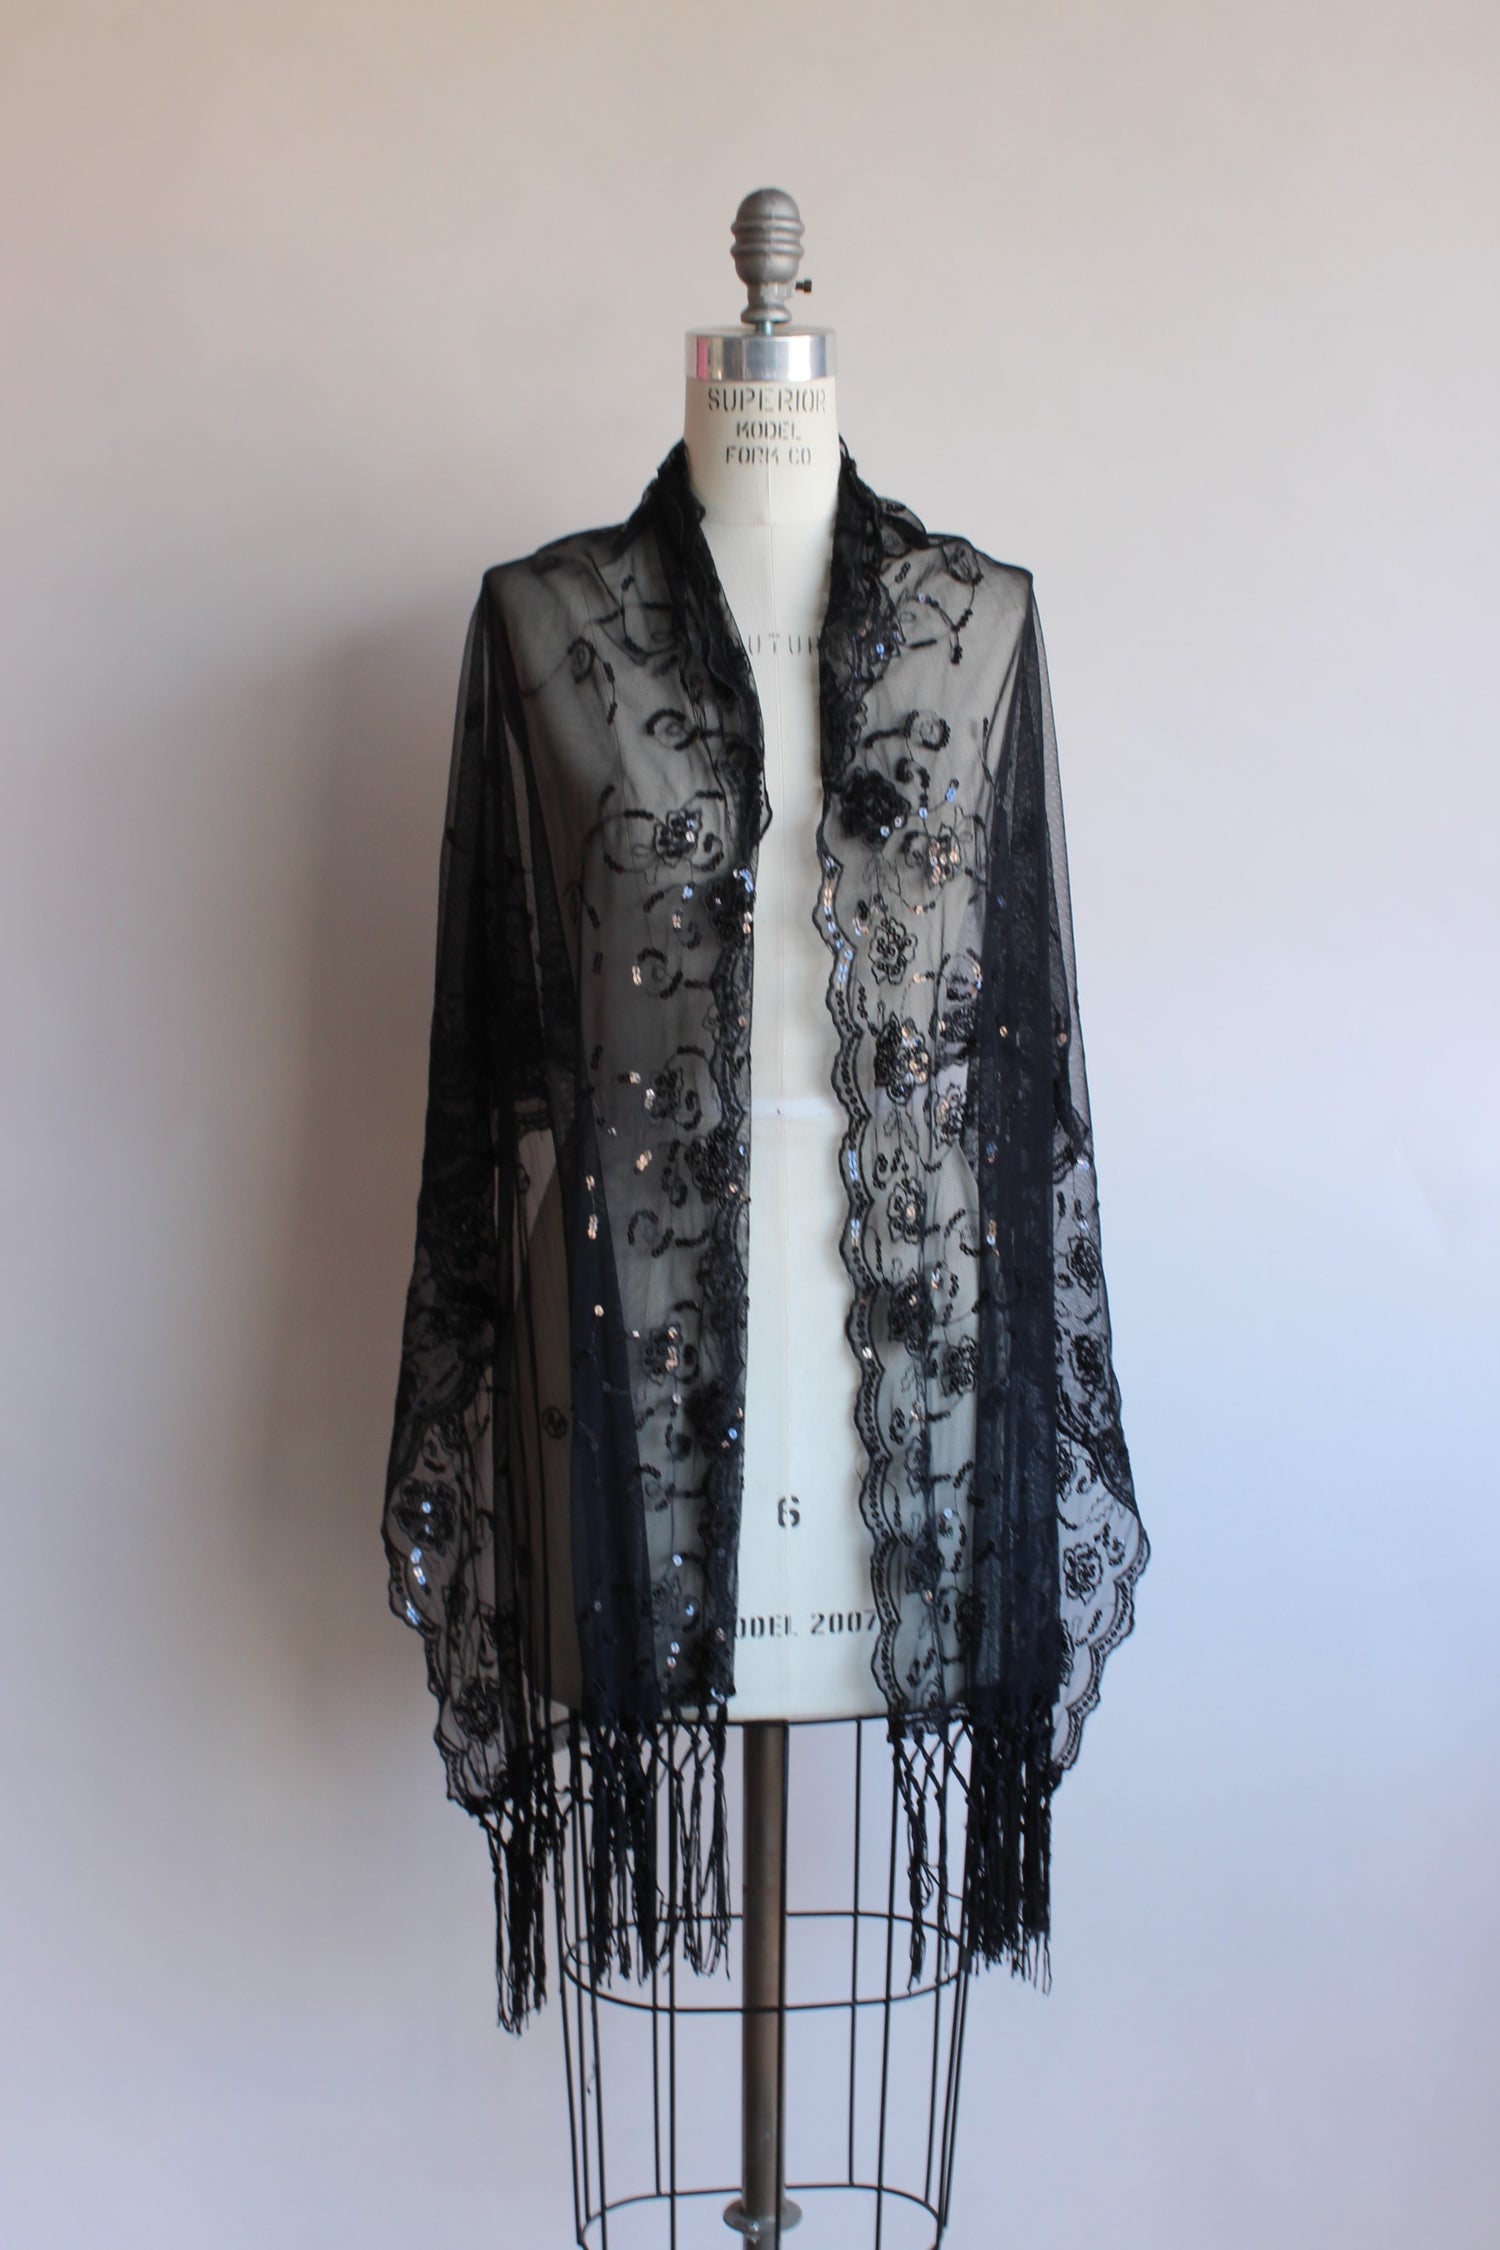 Vintage 1990s Black Lace and Sequin Scarf or Wrap.